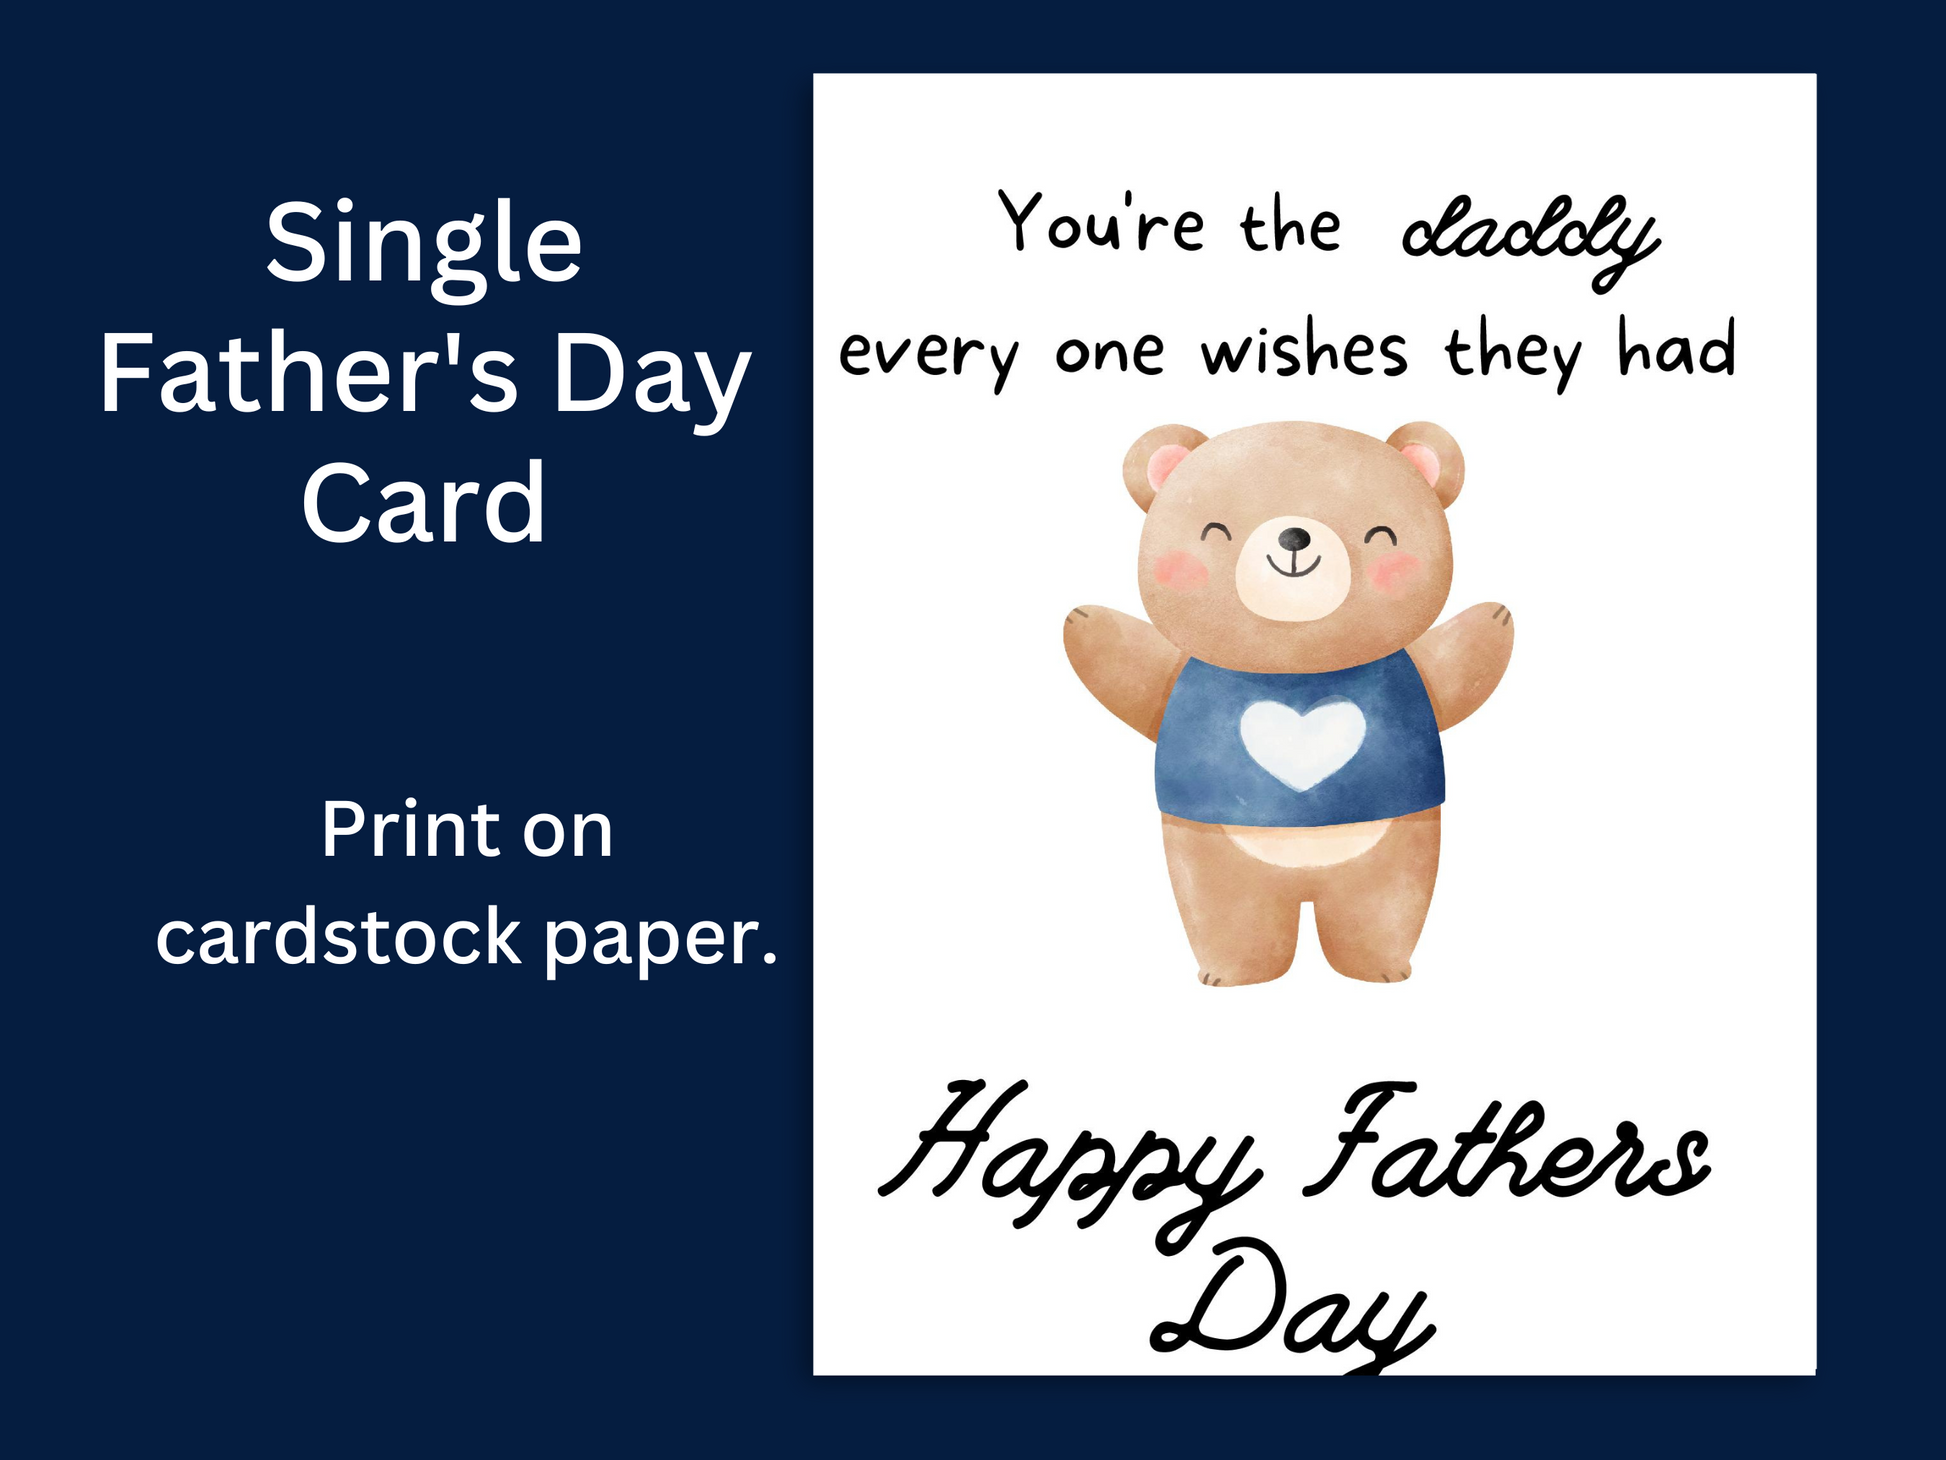 Single father's day card printable with a teddy bear on the front.